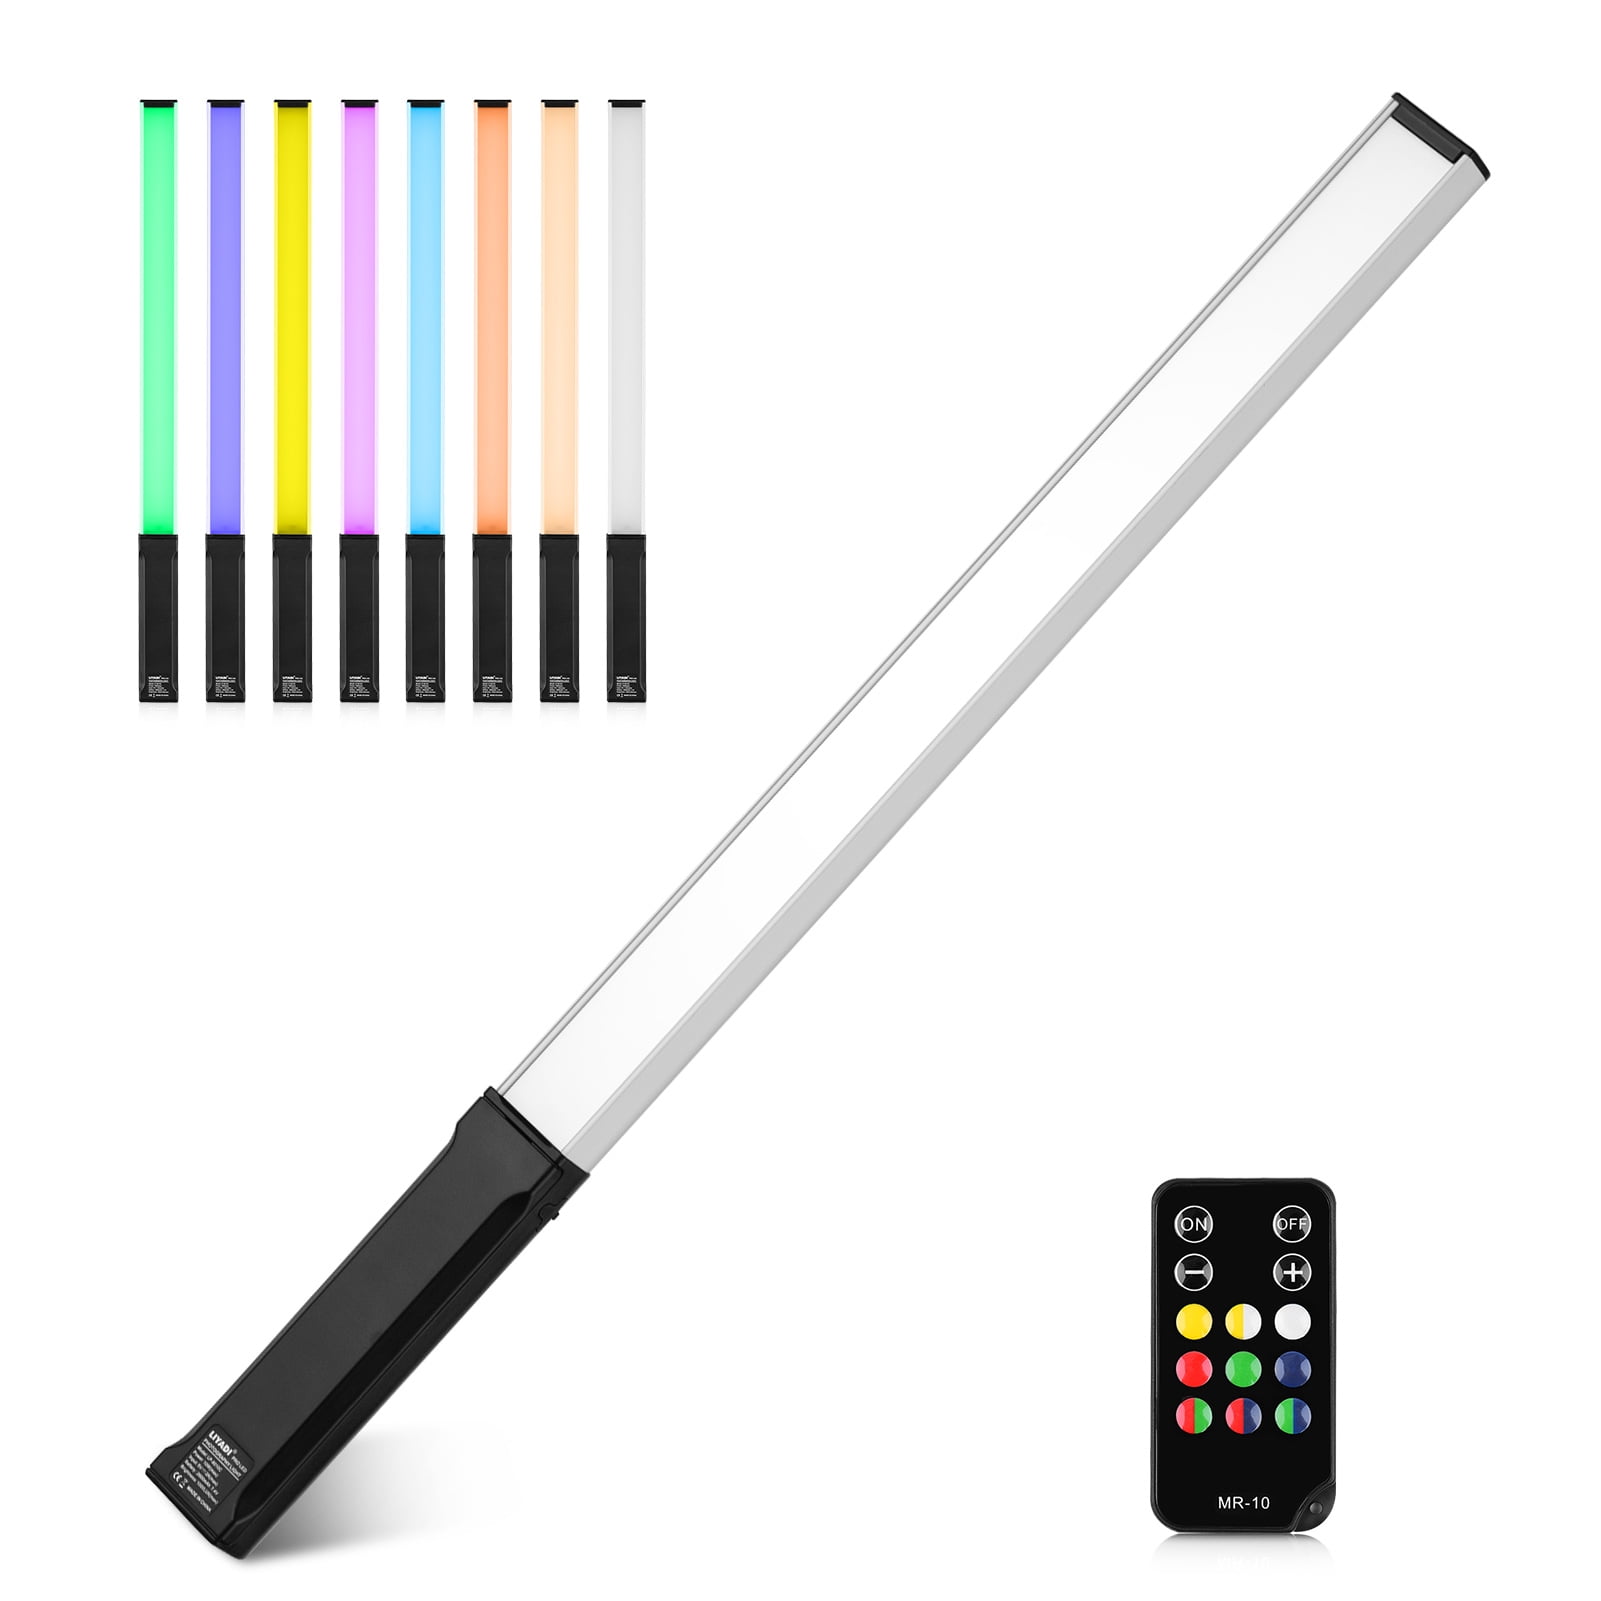 Details about   Deep Light Wand Handheld USB 16 LED Lamp 